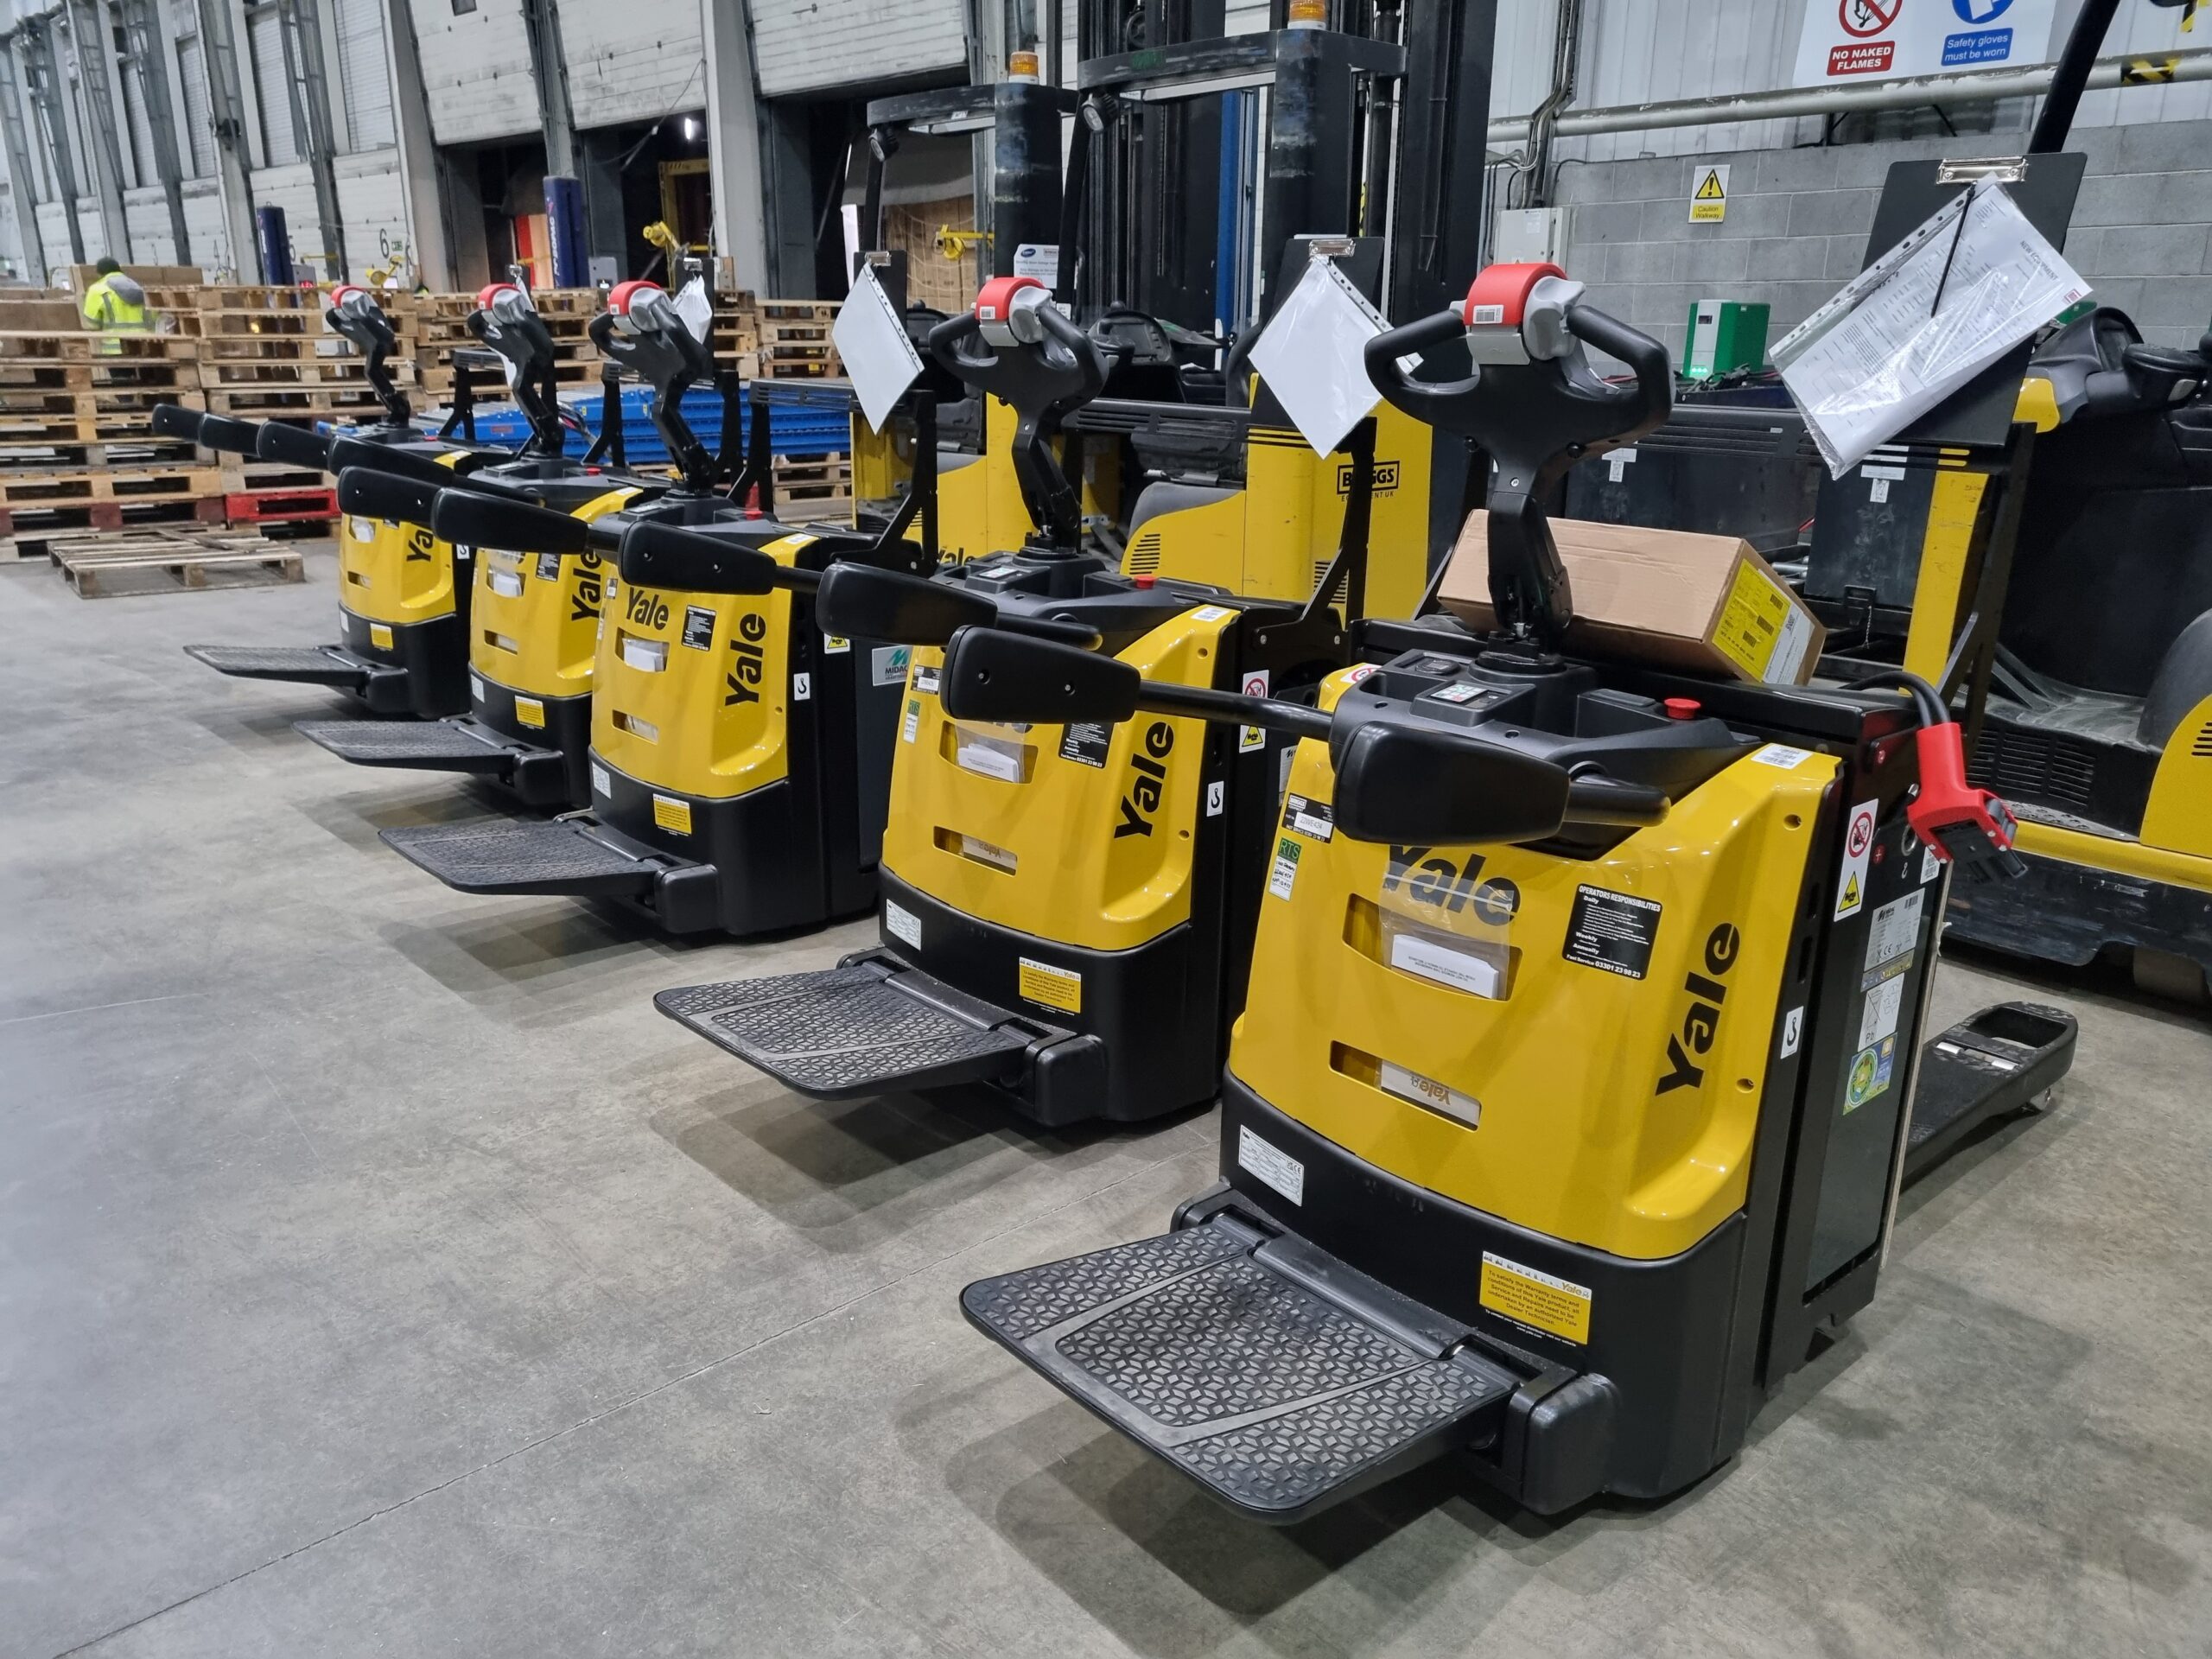 New Delivery of Yale Equipment